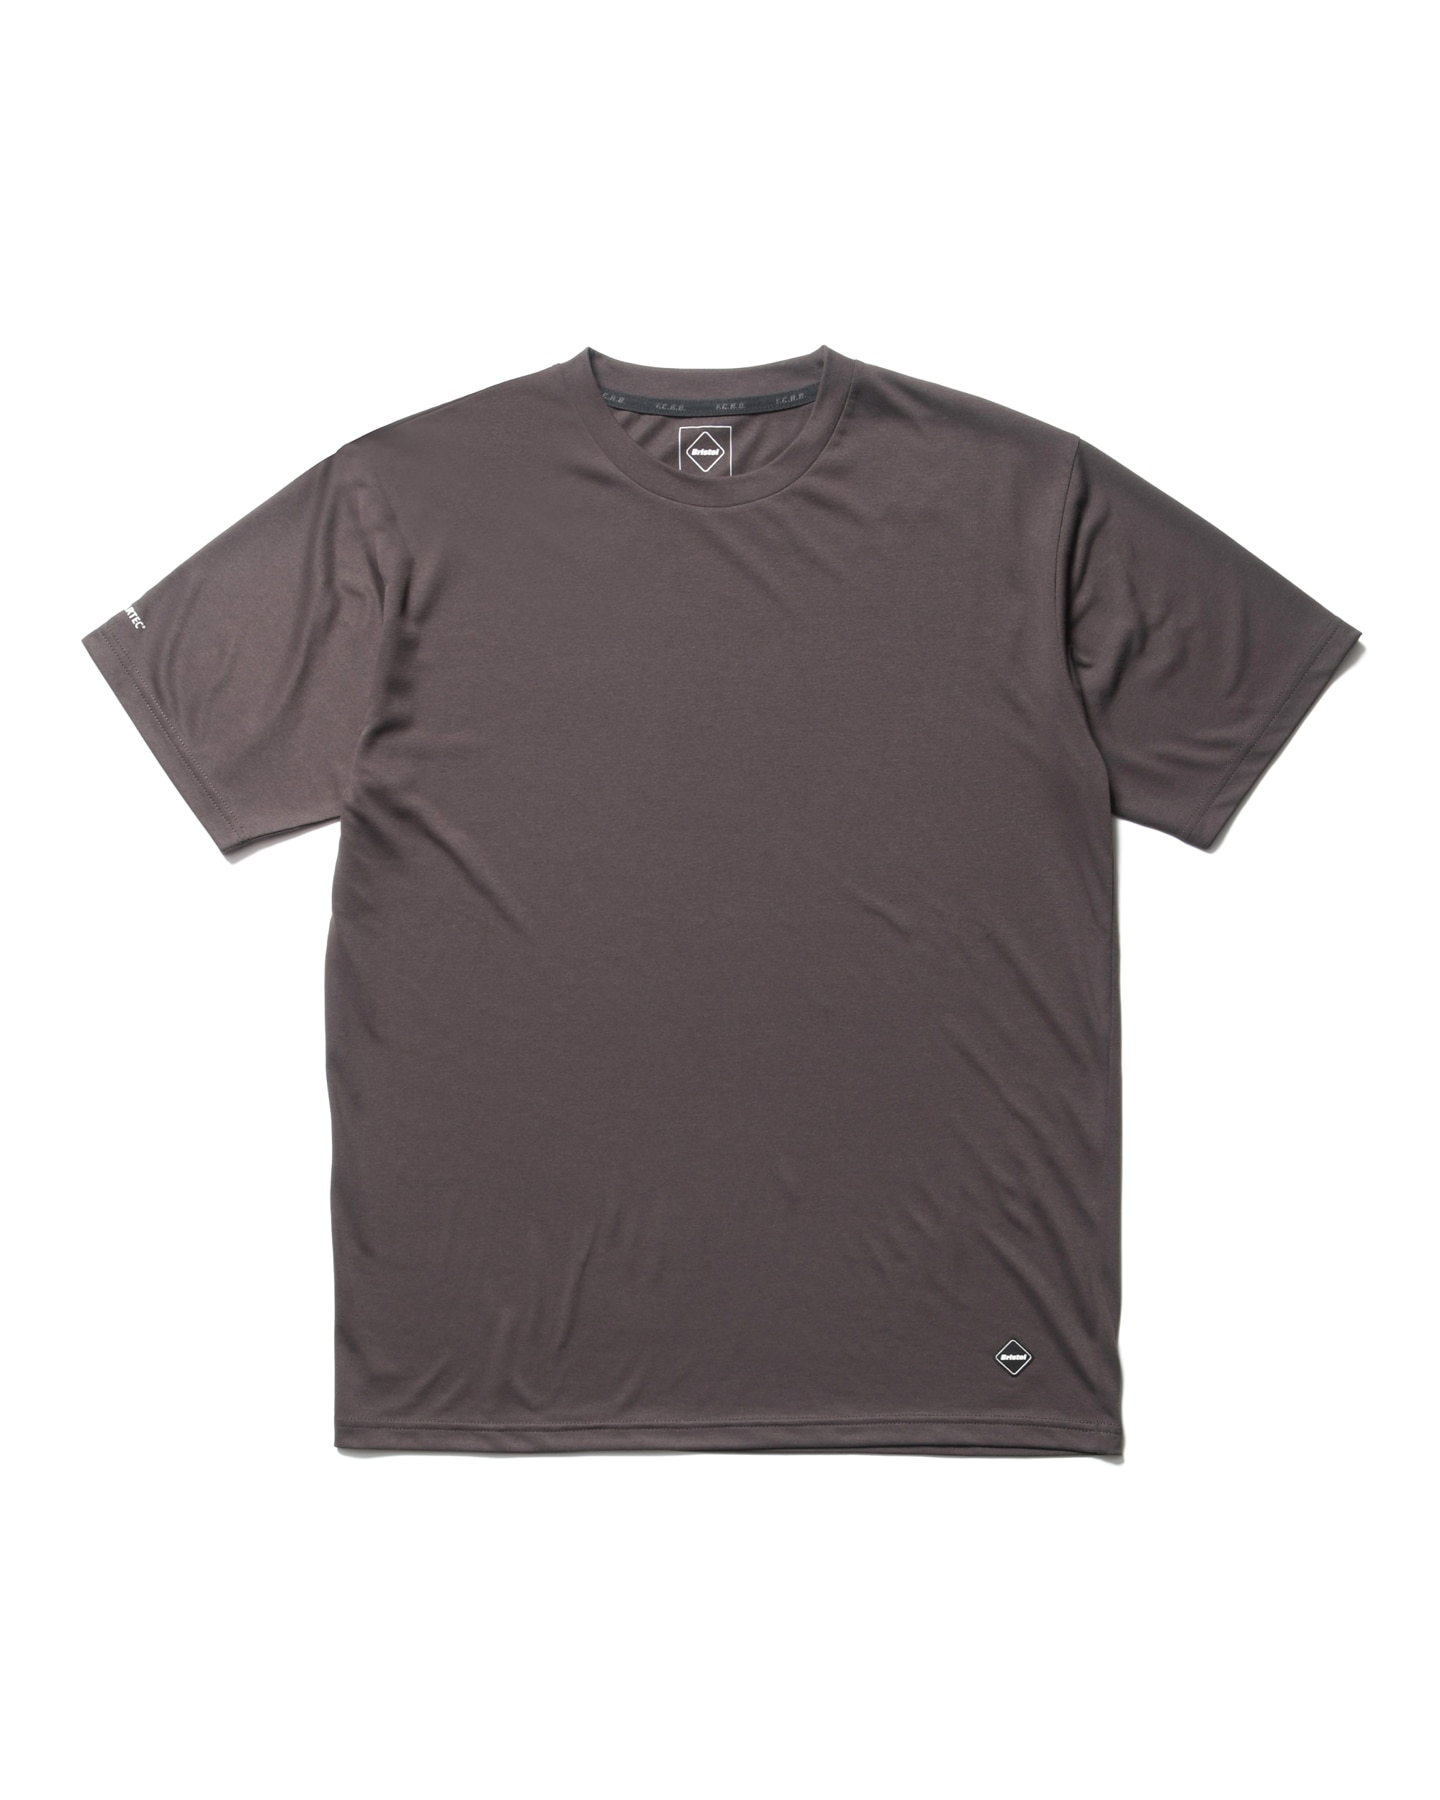 SOPH. | POLARTEC POWER DRY 3PACK TEE(S 3 COLOR):